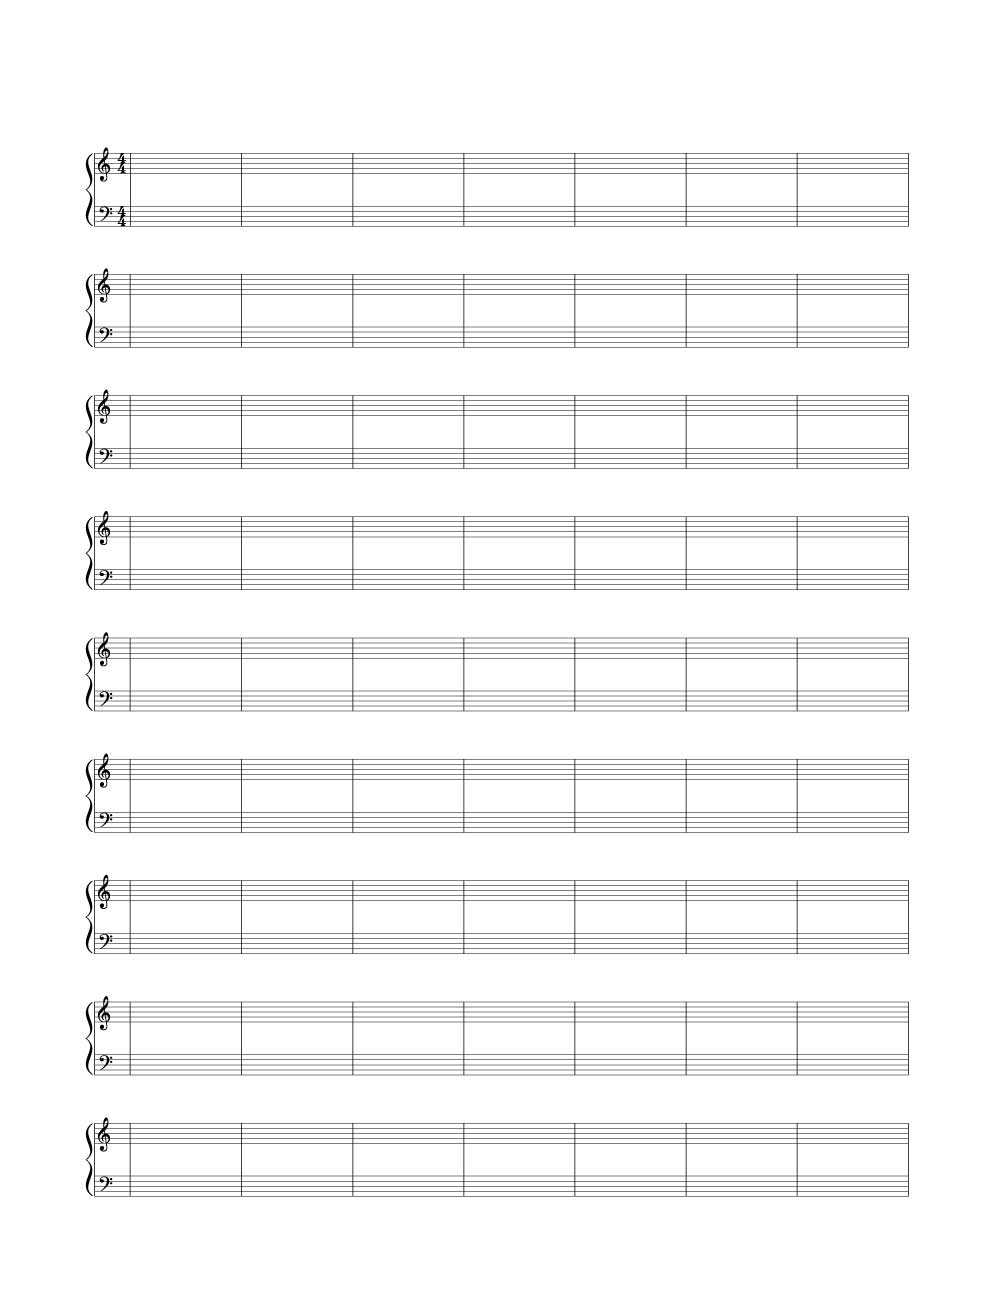 4/4 Time Signature Double Bar Blank Sheet Music | Woo! Jr Inside Blank Sheet Music Template For Word